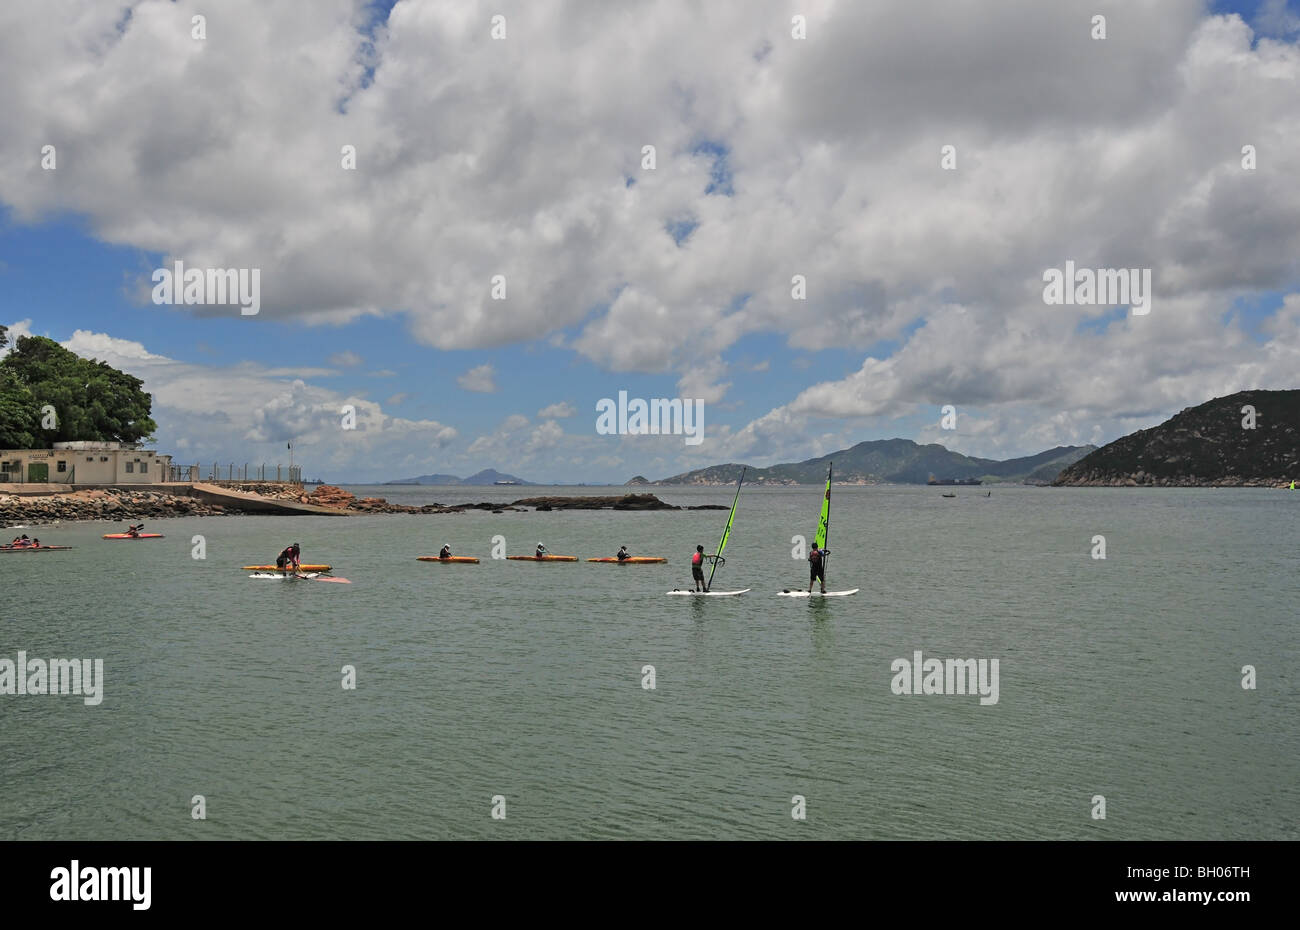 Wind surfers and canoeists on the calm waters of Stanley Bay, Stanley, Hong Kong, China Stock Photo